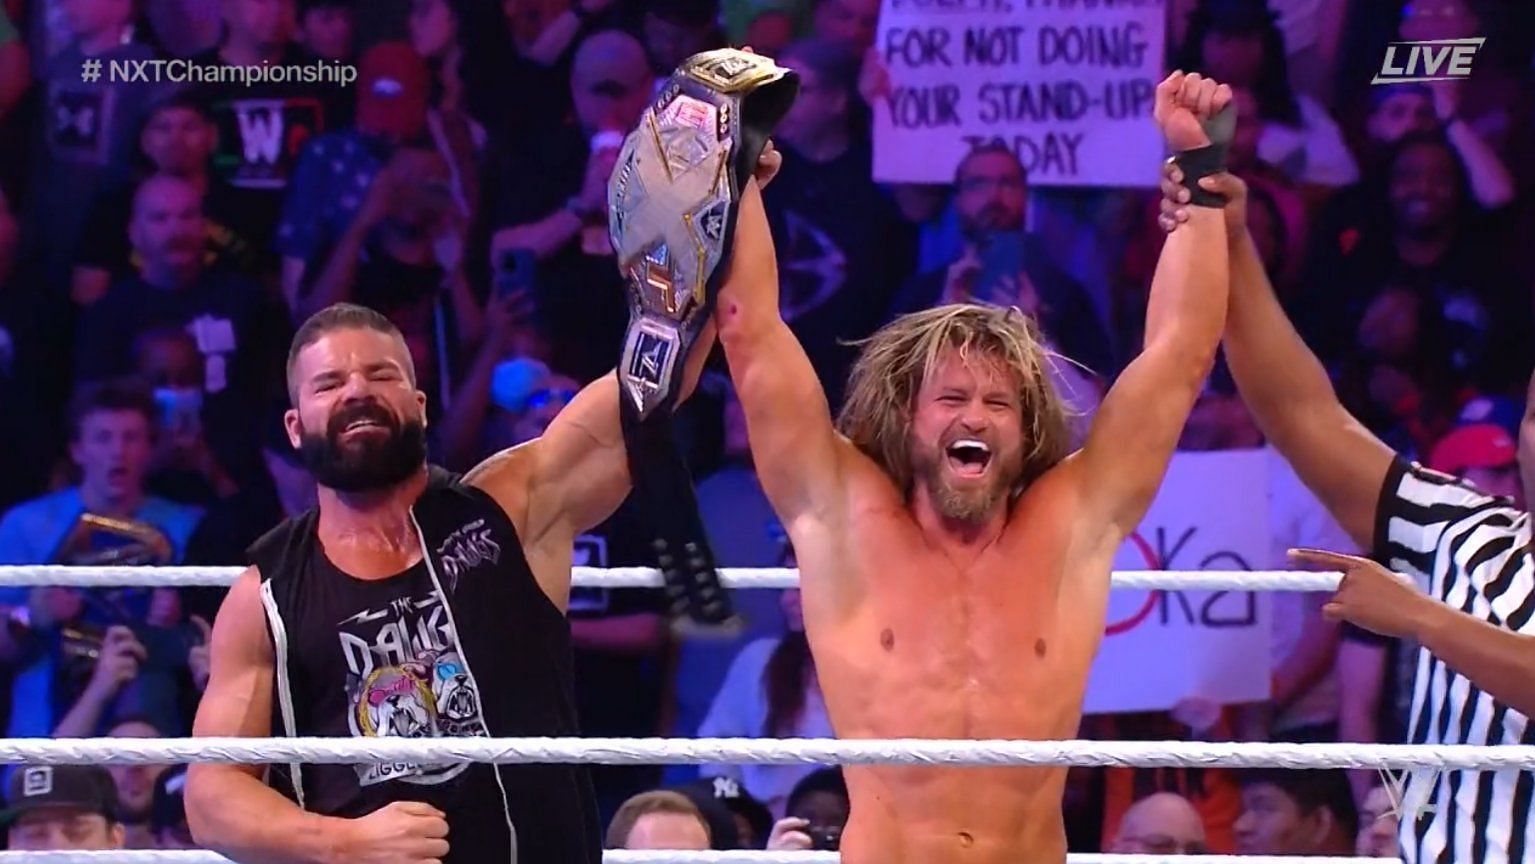 Dolph Ziggler celebrates his win with Robert Roode